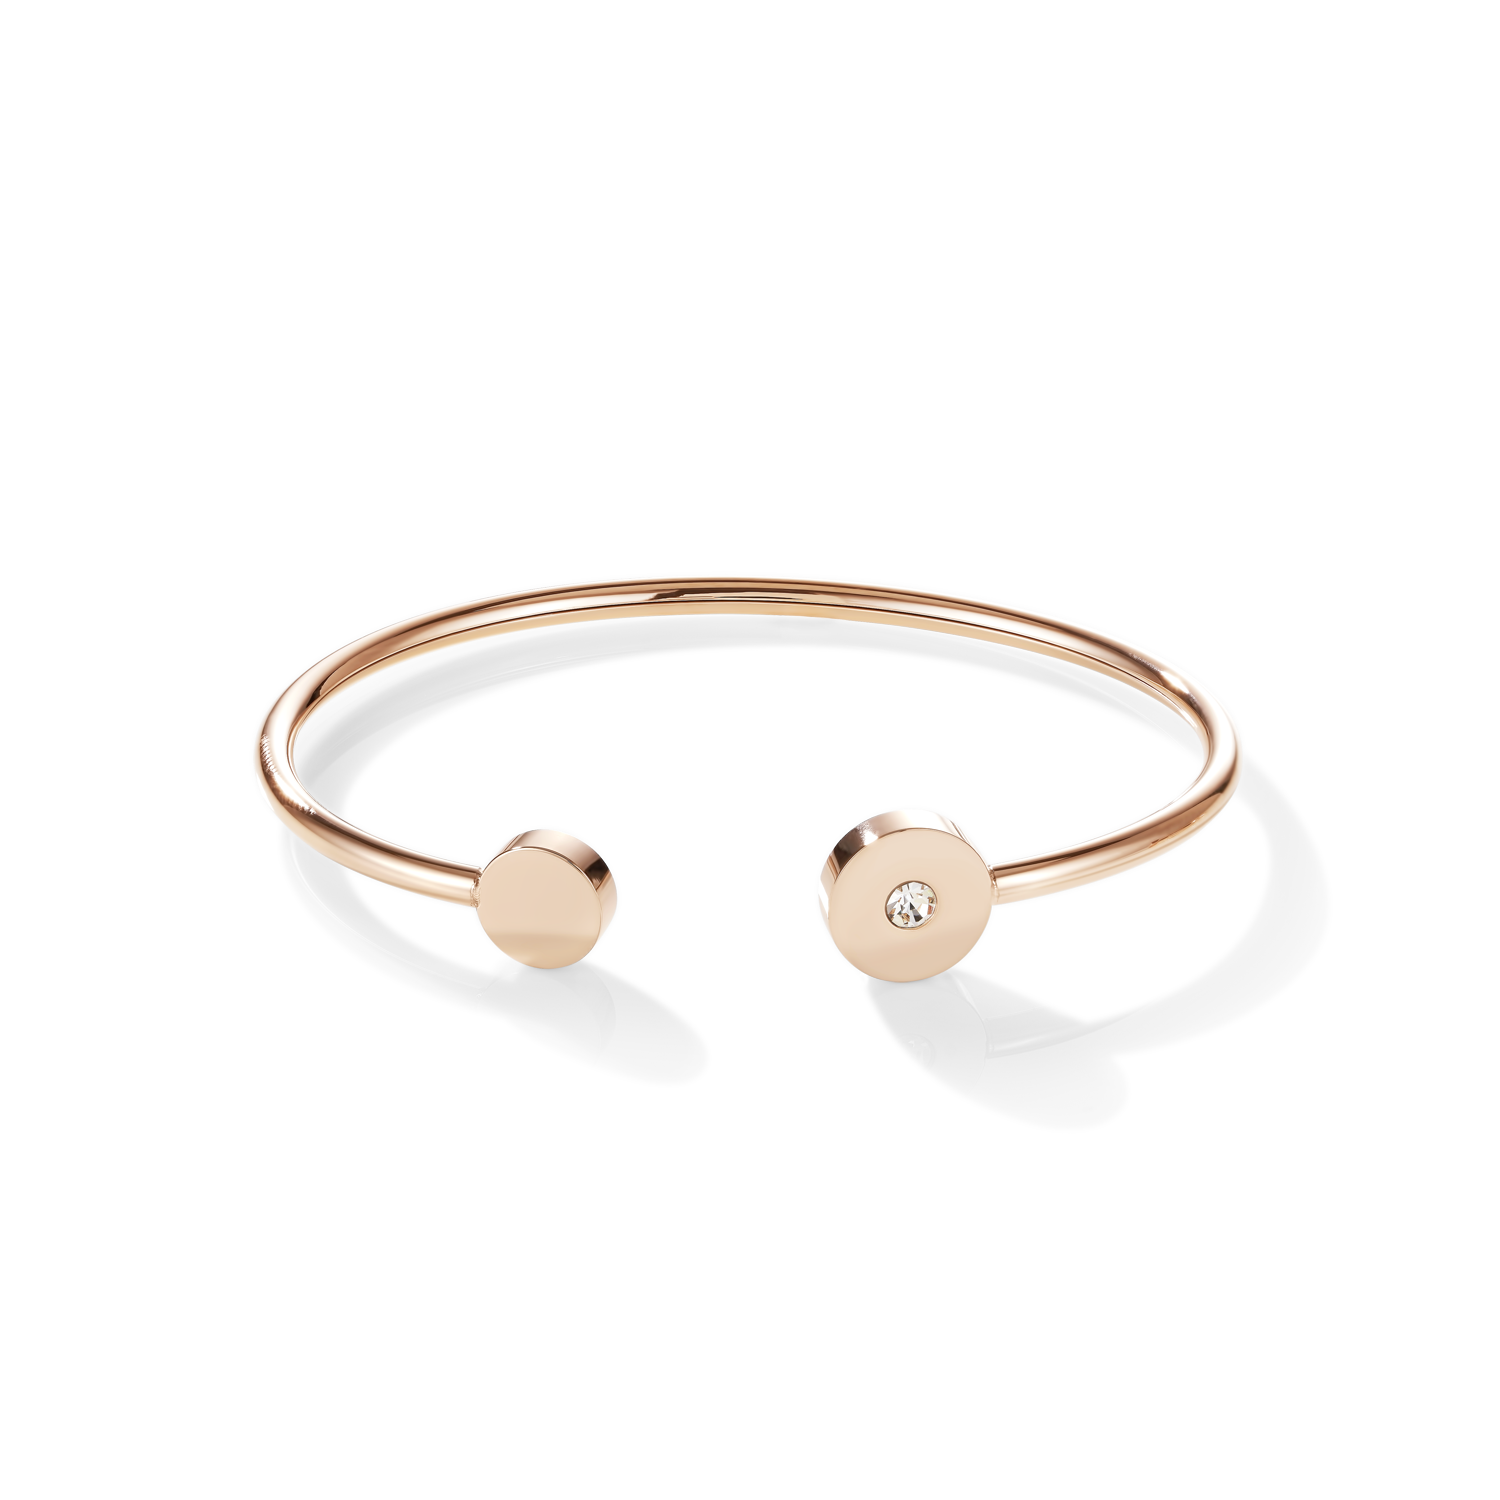 Bangle SparklingCOINS stainless steel rose gold